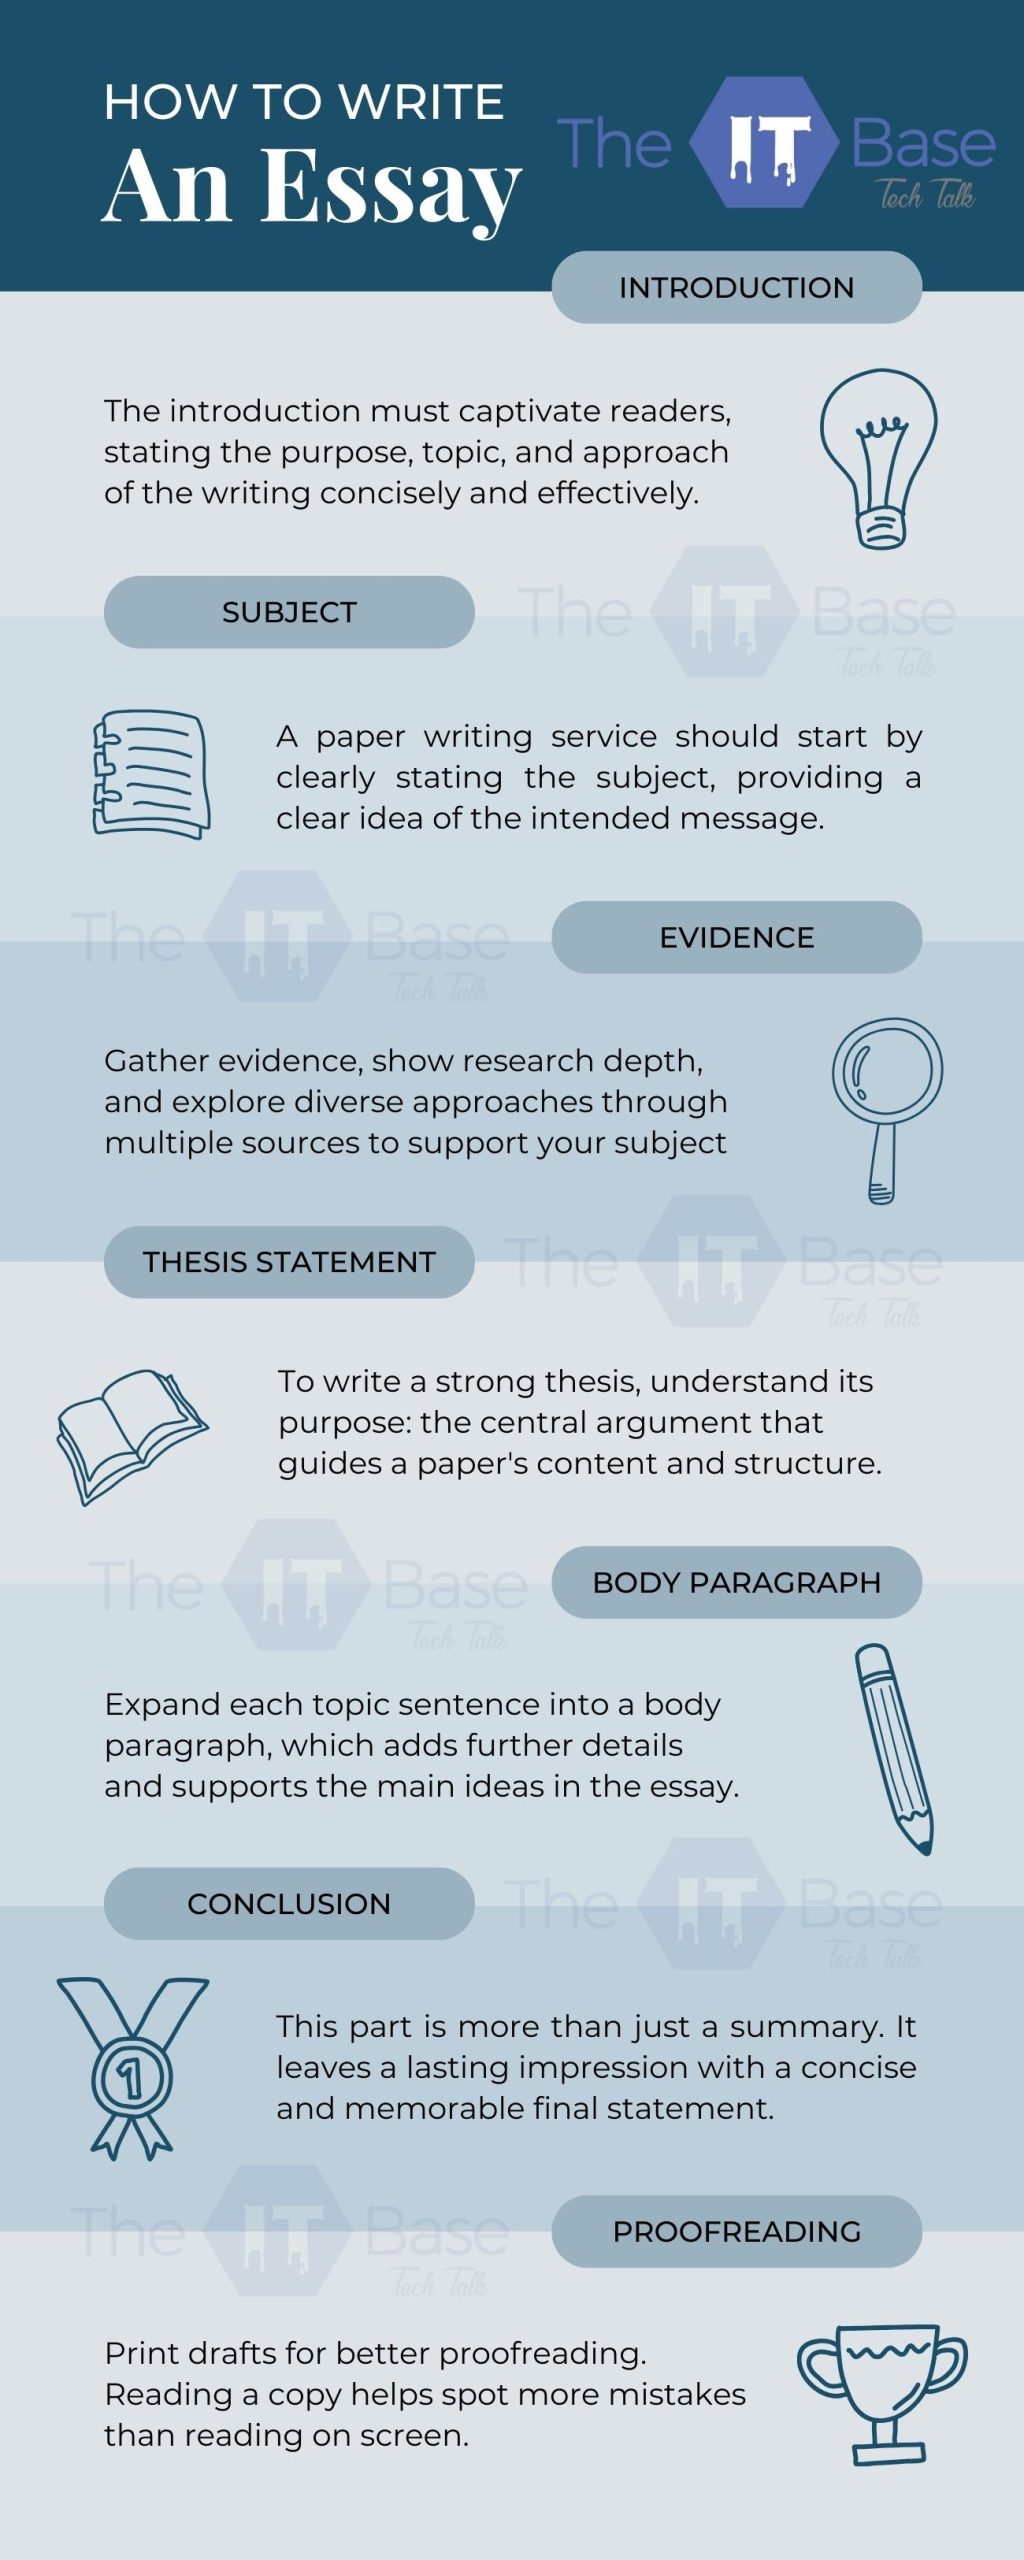 How to Write an Essay Infographic - TheITbase Write for us